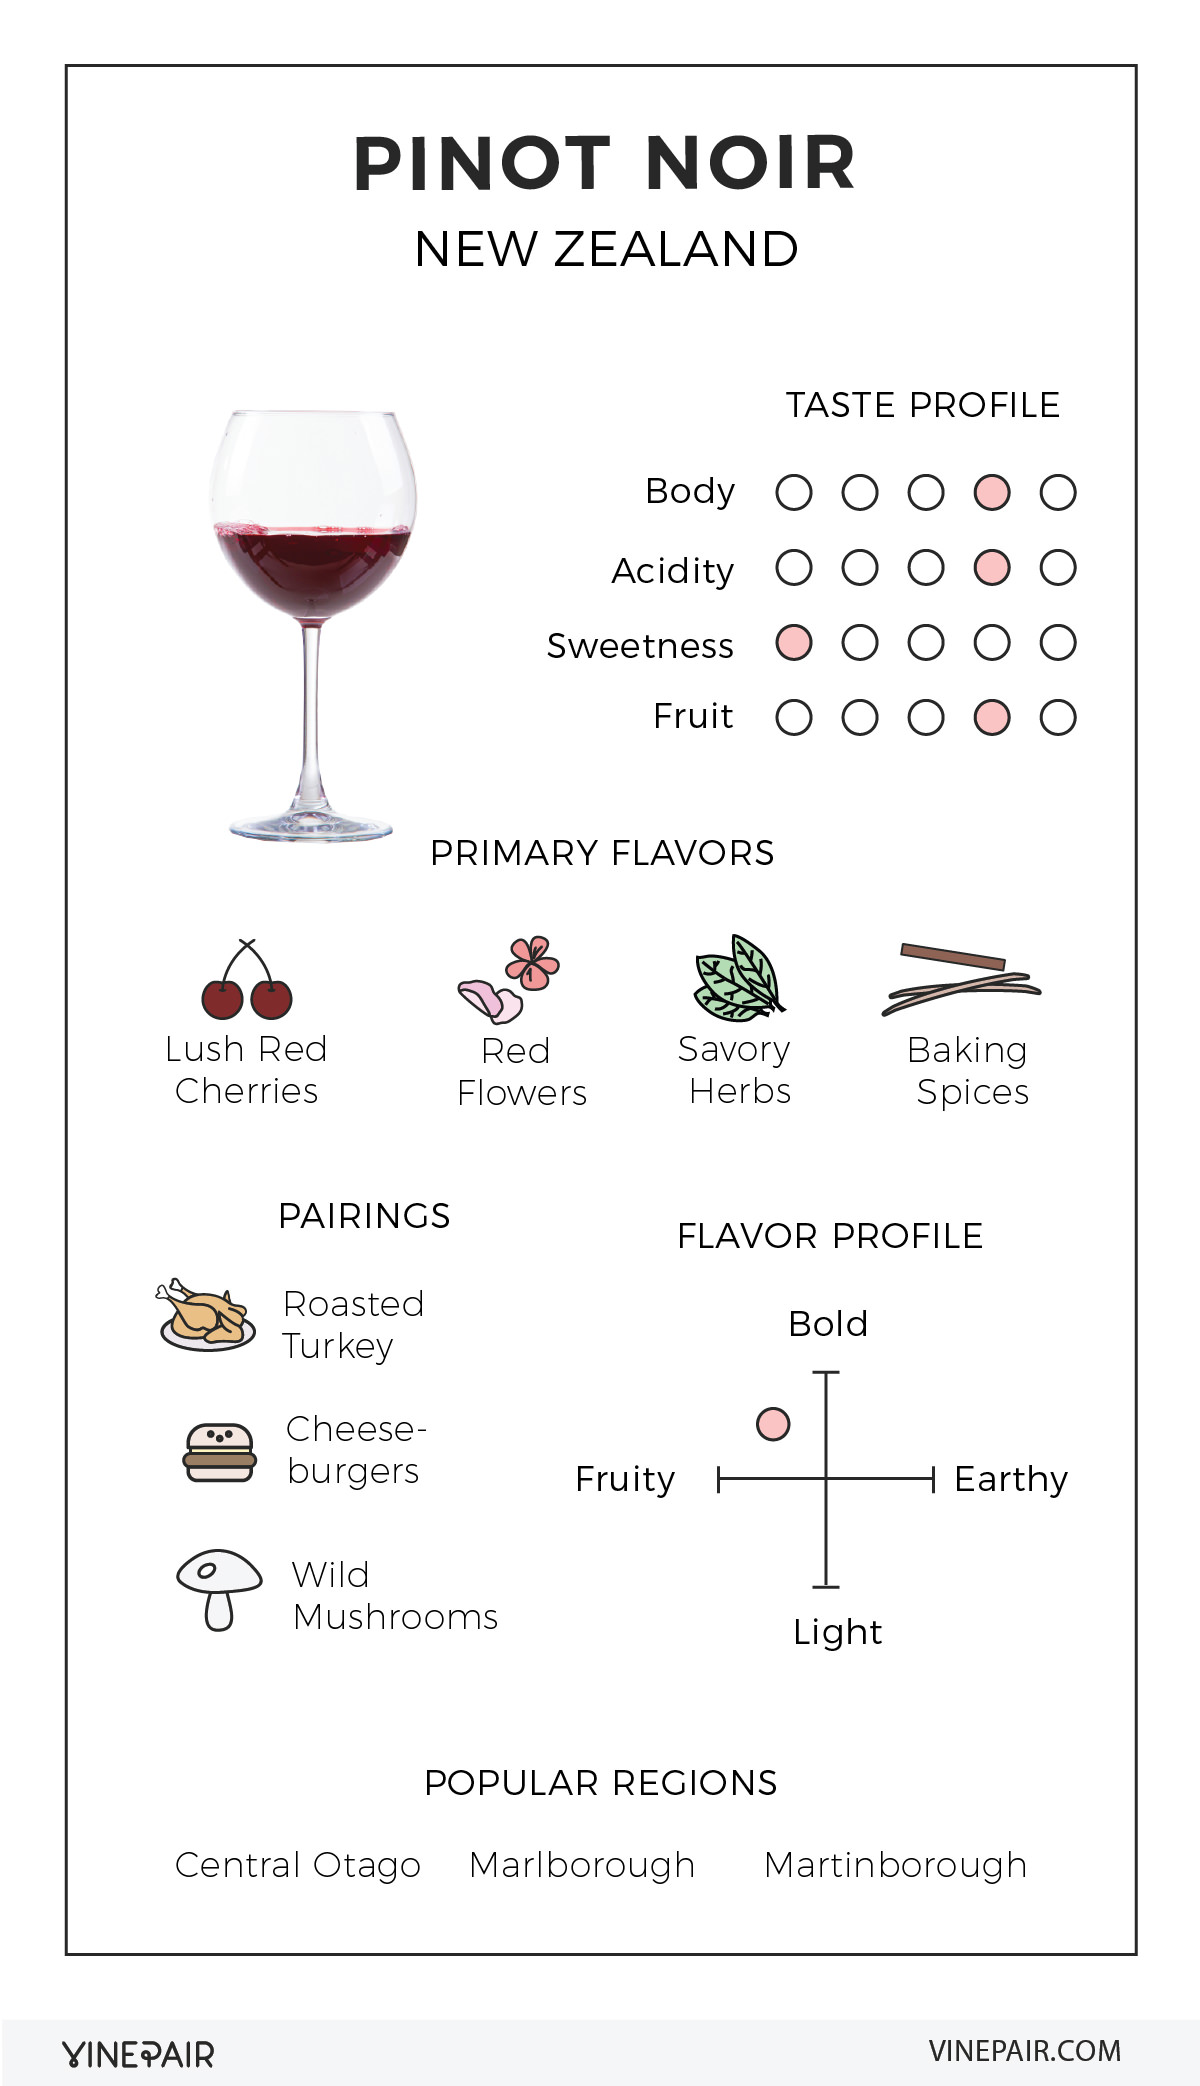 An Illustrated Guide to Pinot Noir from New Zealand